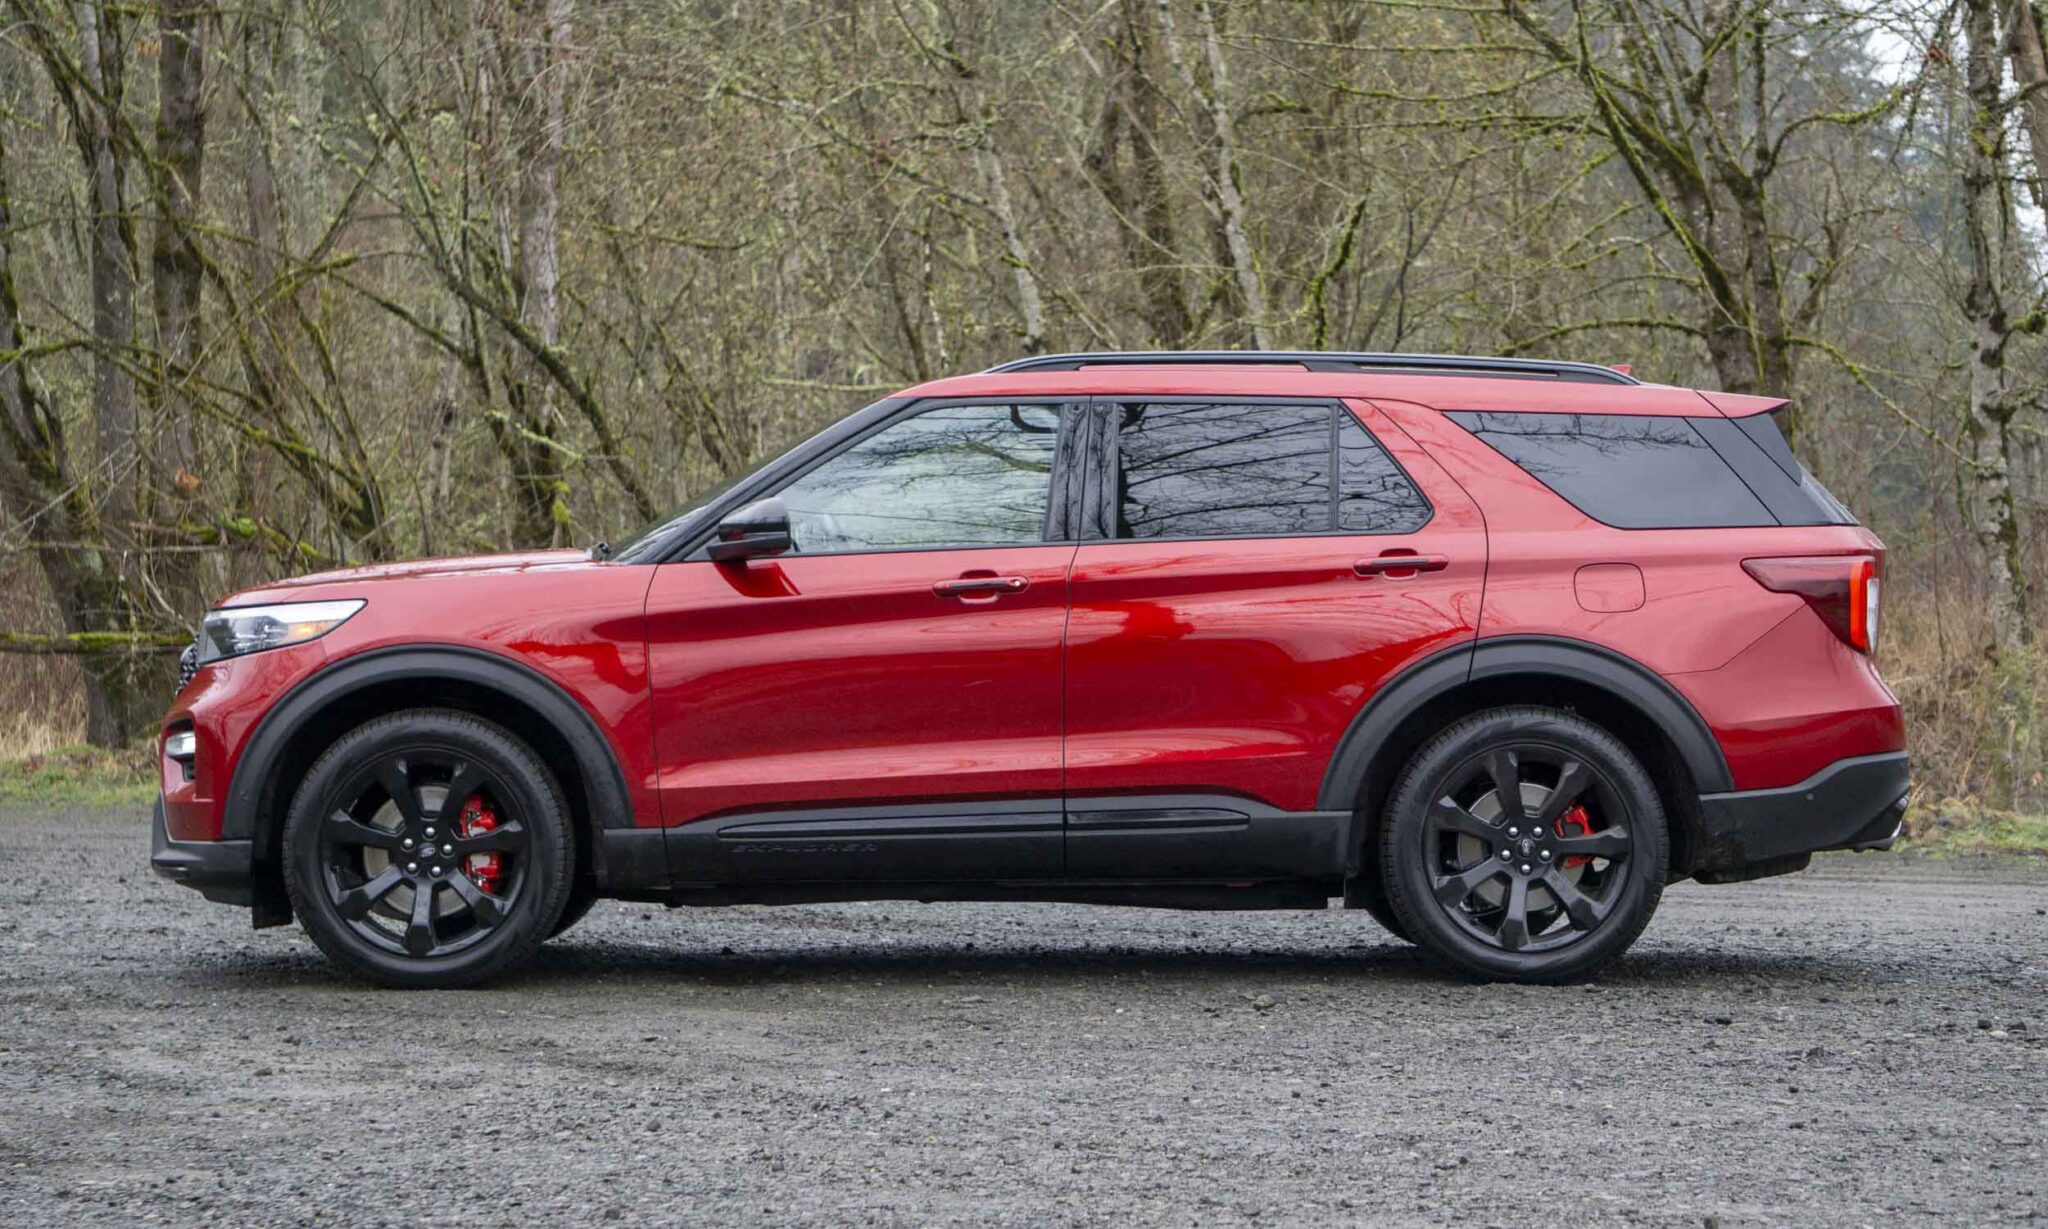 Choose the Best Ford Explorer Trim to Fits Your Lifestyle in 2023